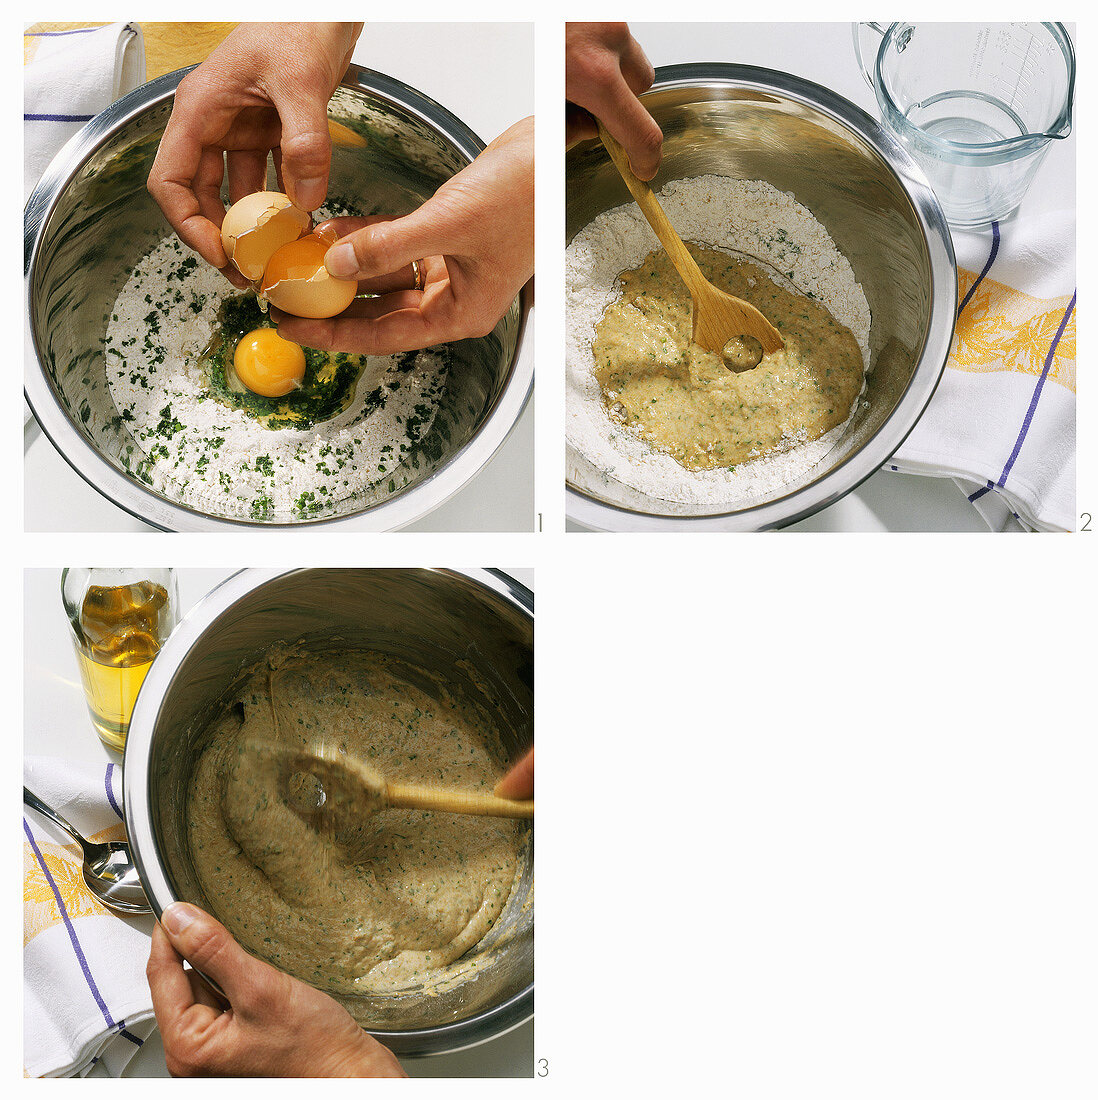 Making herb noodles (spaetzle) (mixing the dough)